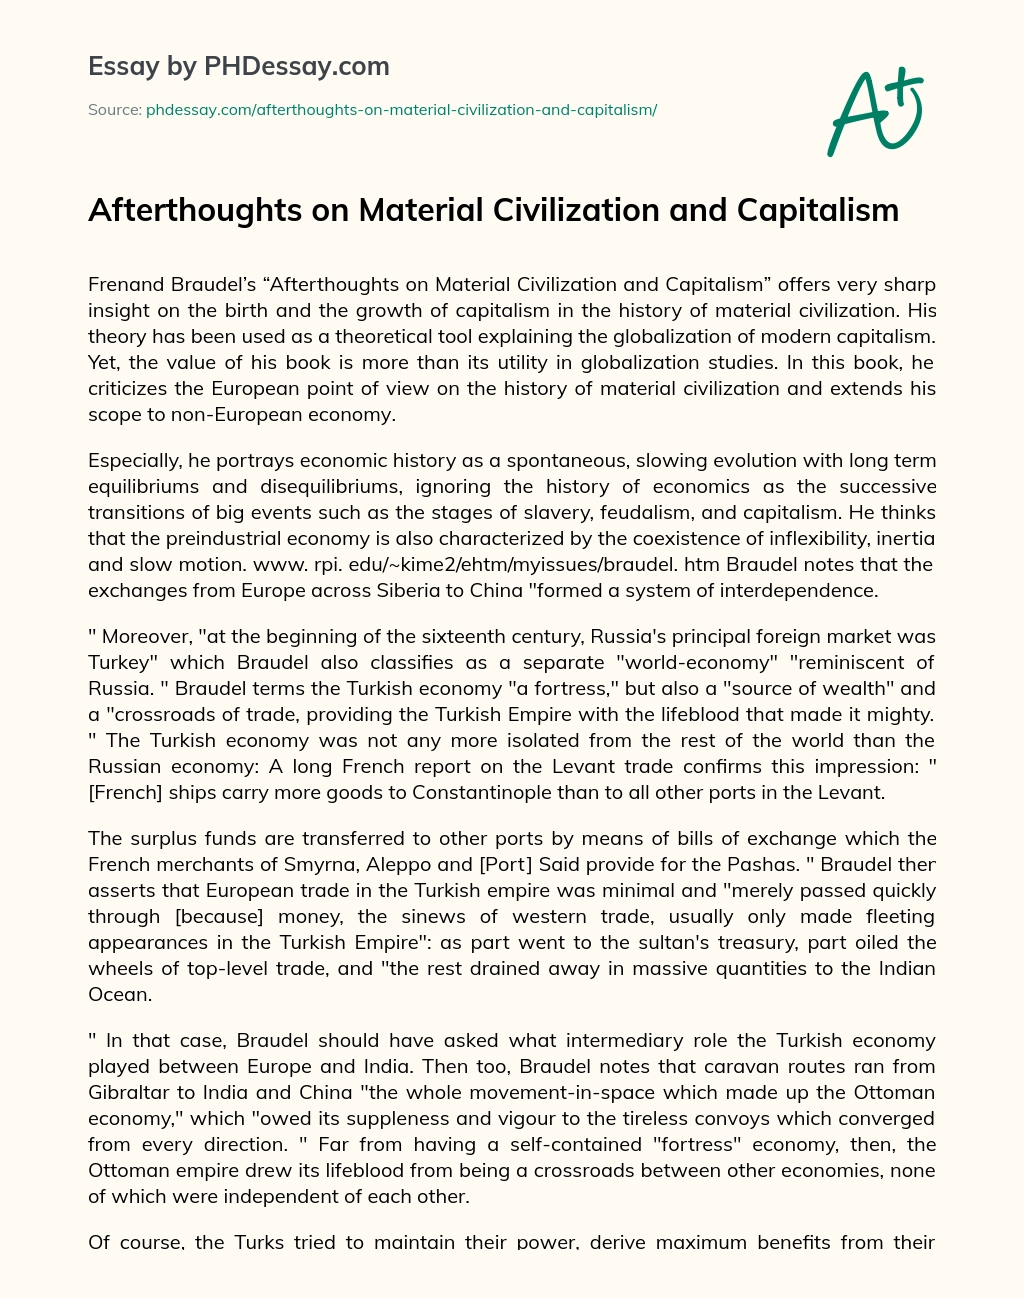 Afterthoughts on Material Civilization and Capitalism essay